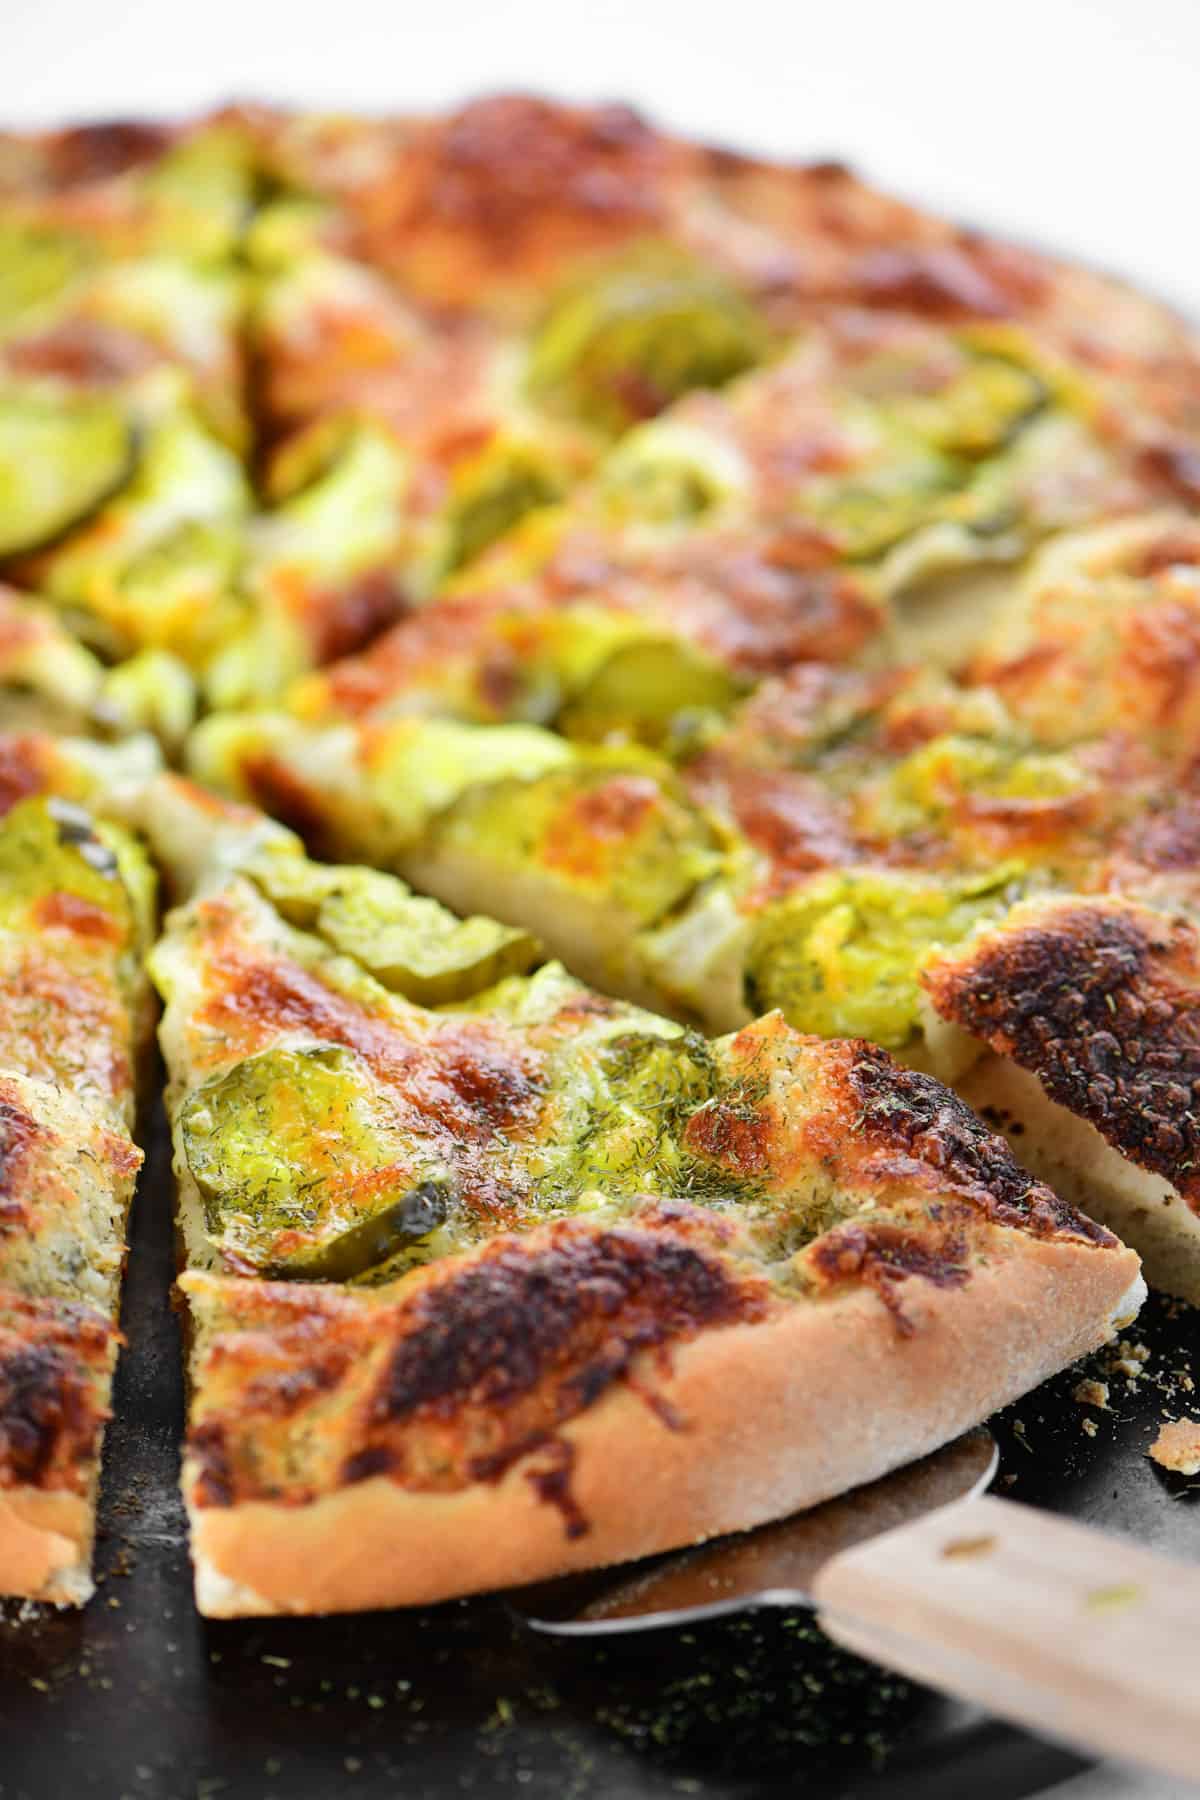 A serving utensil is shown underneath a slice of pickle pizza.